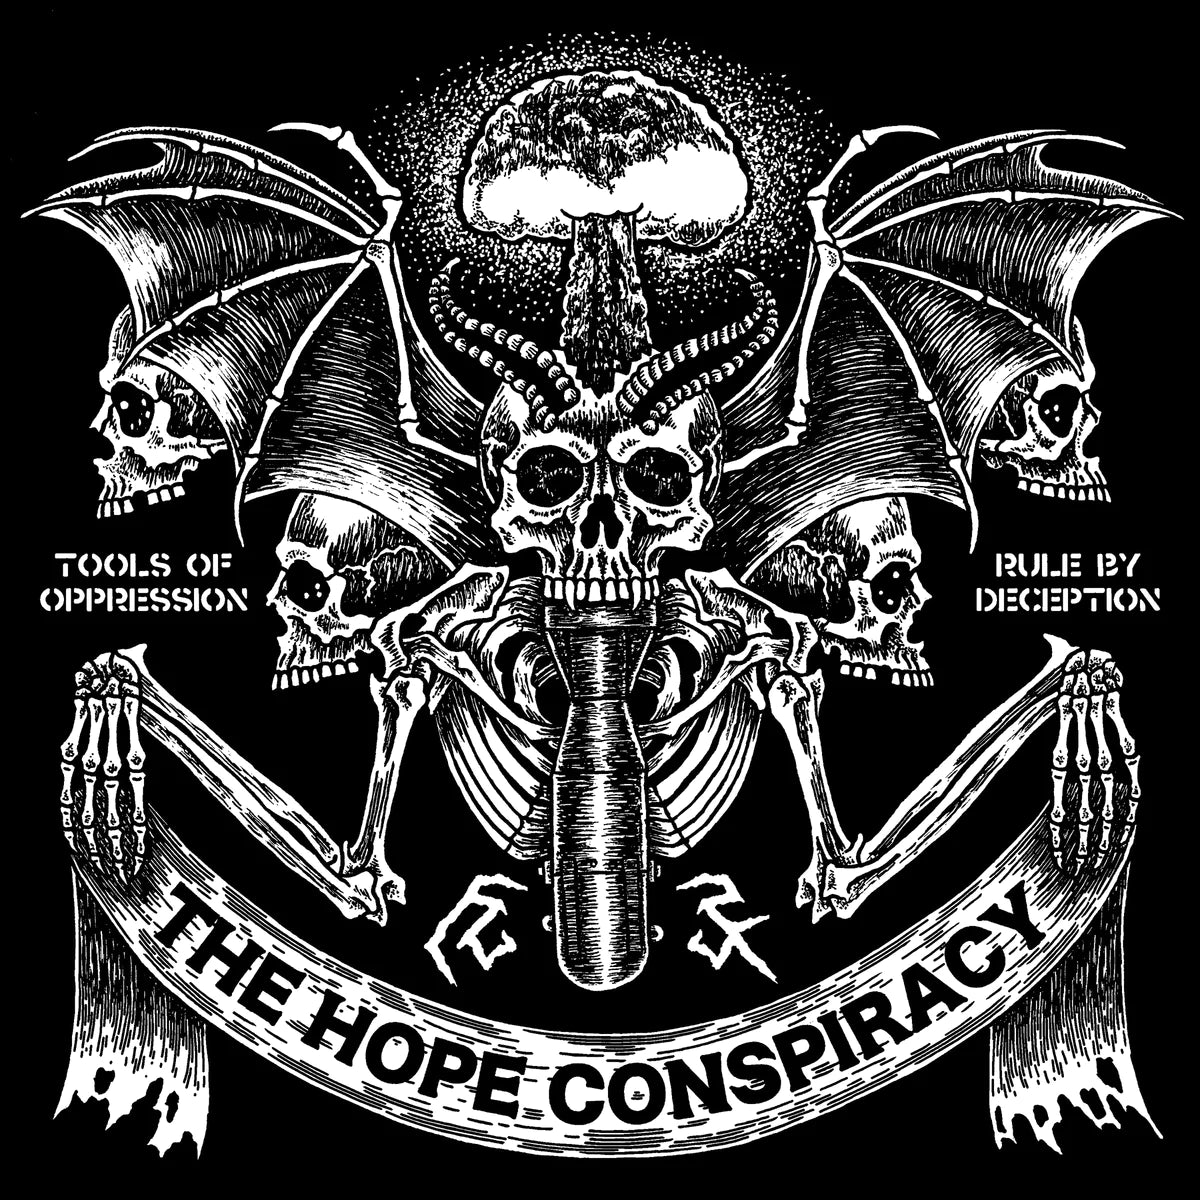 THE HOPE CONSPIRACY "Tools Of Oppression/Rule By Deception" CD